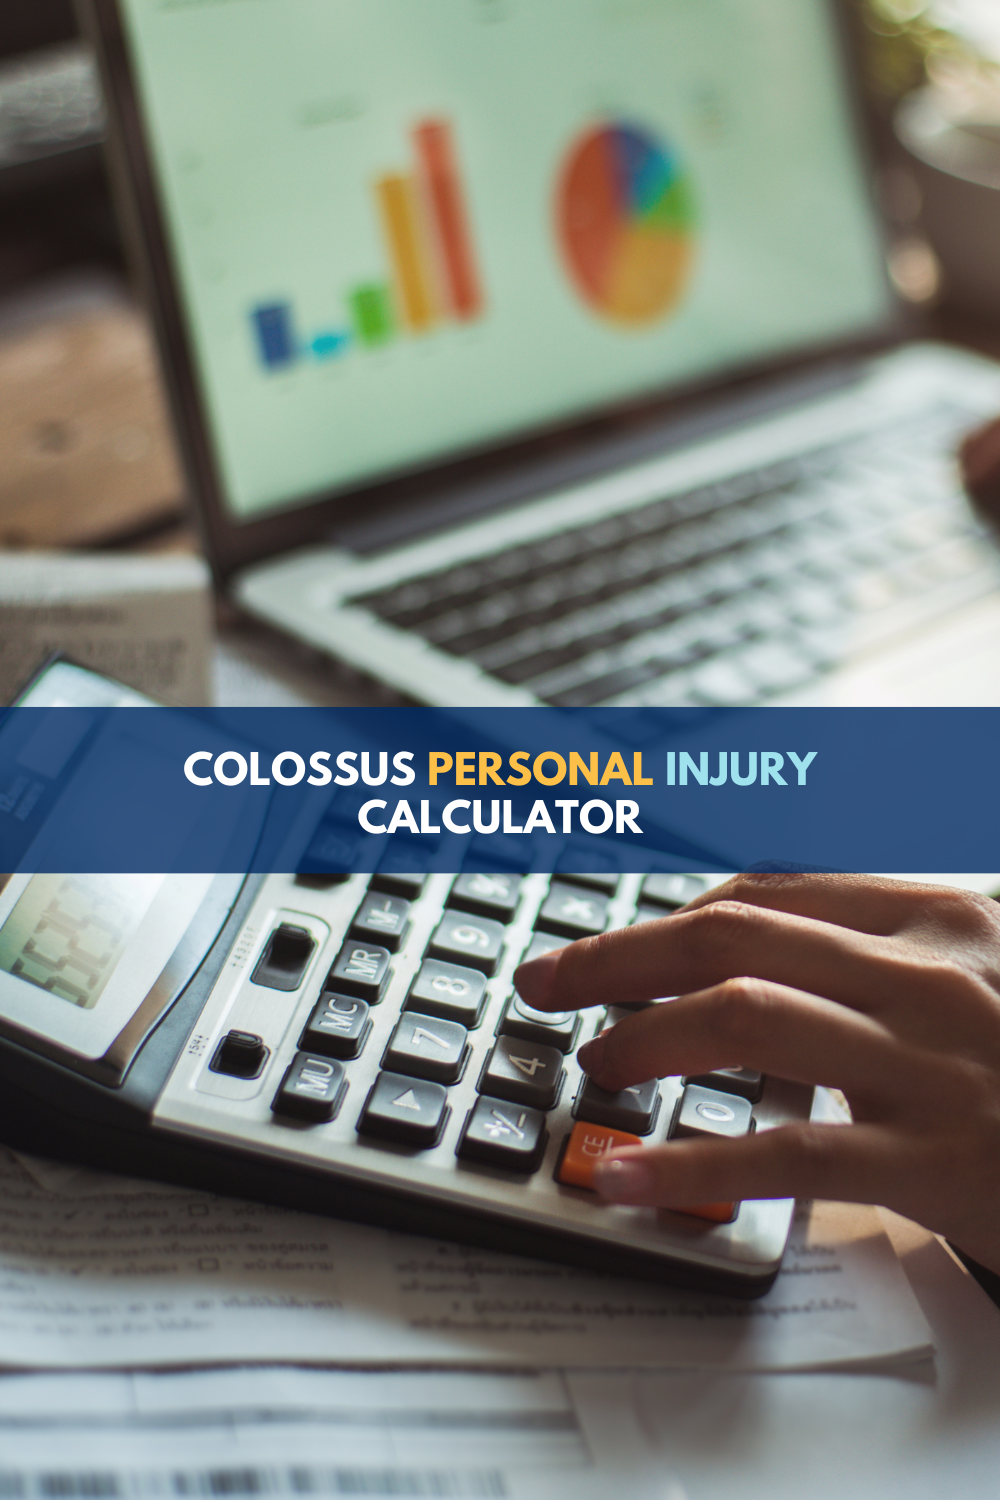 Colossus Personal Injury Calculator Explained: The What And How